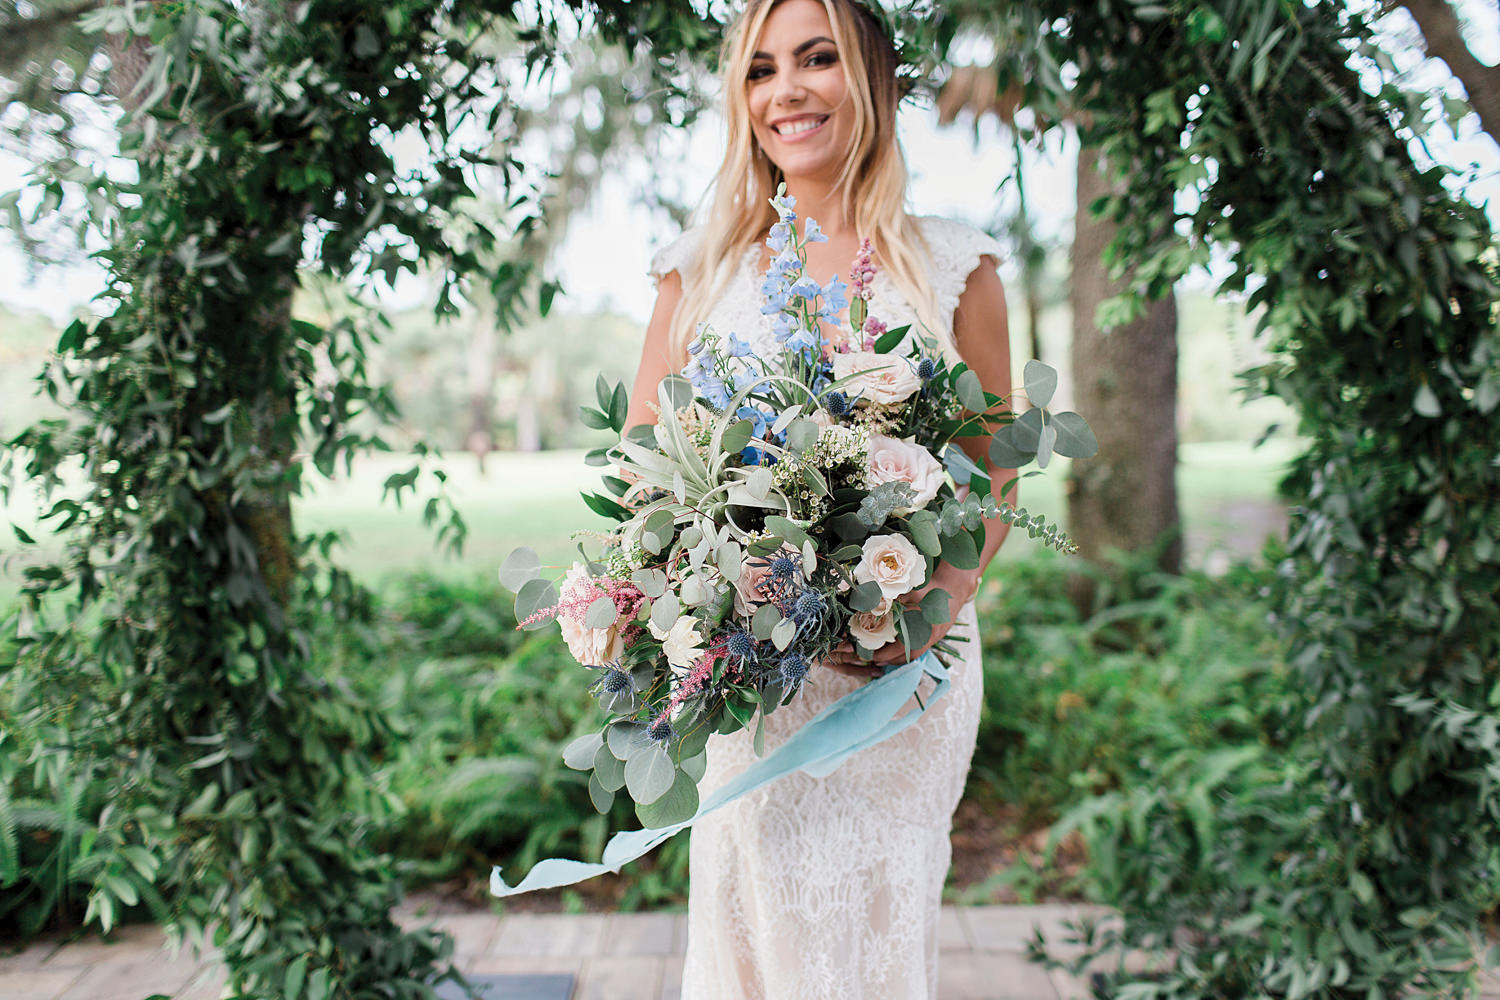 Bride holding her bouquet filled with blue, peach, blush, and greenery.